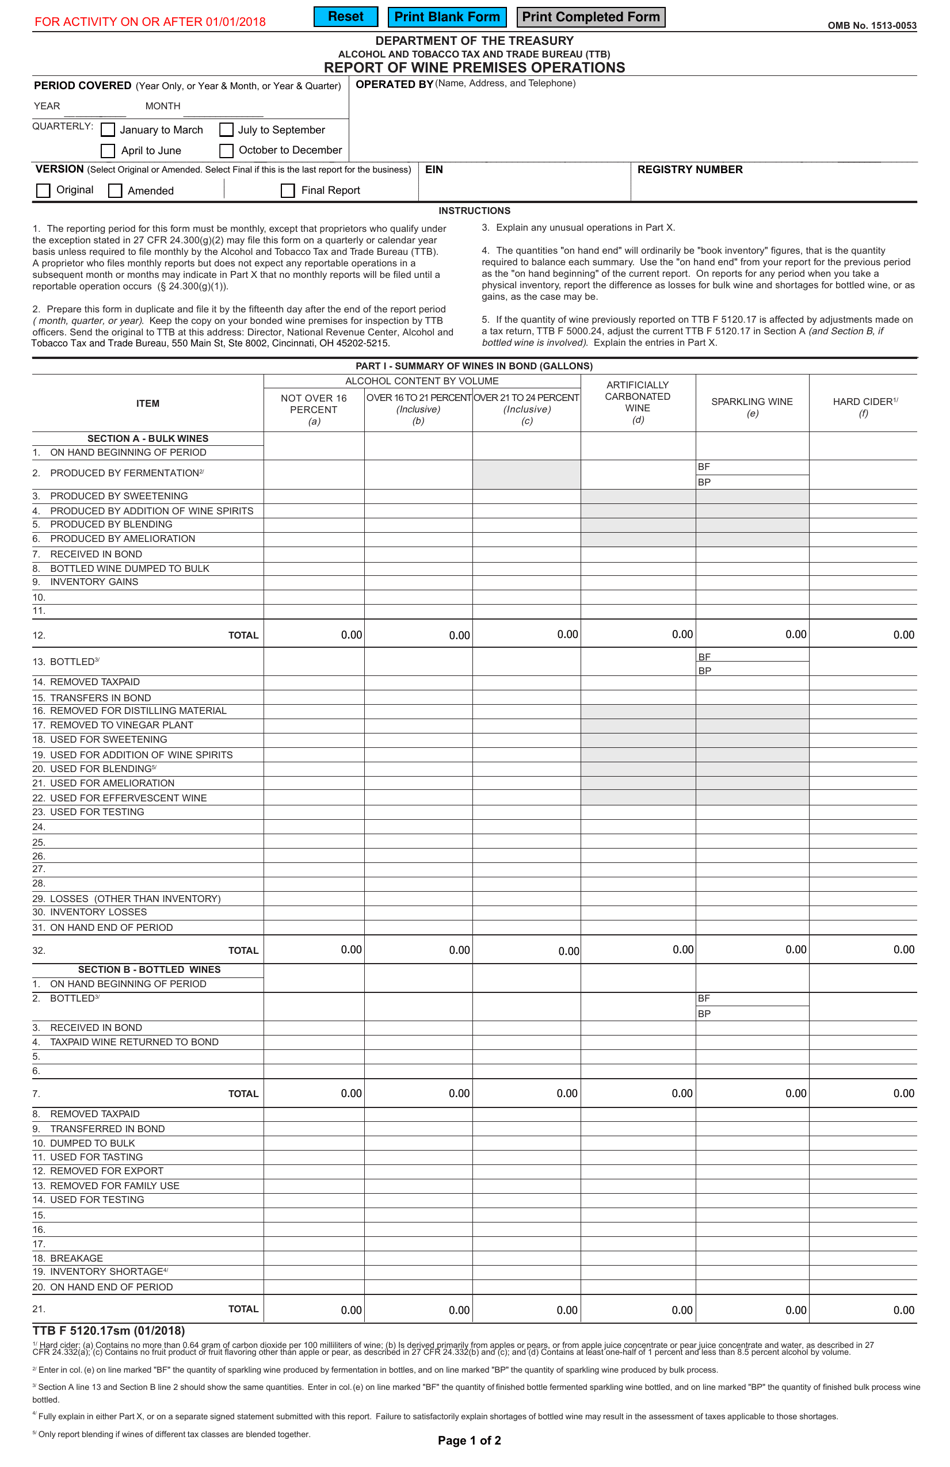 TTB Form 5120.17SM Report of Wine Premises Operations Smart Form - for Activity on or After 01 / 01 / 2018, Page 1